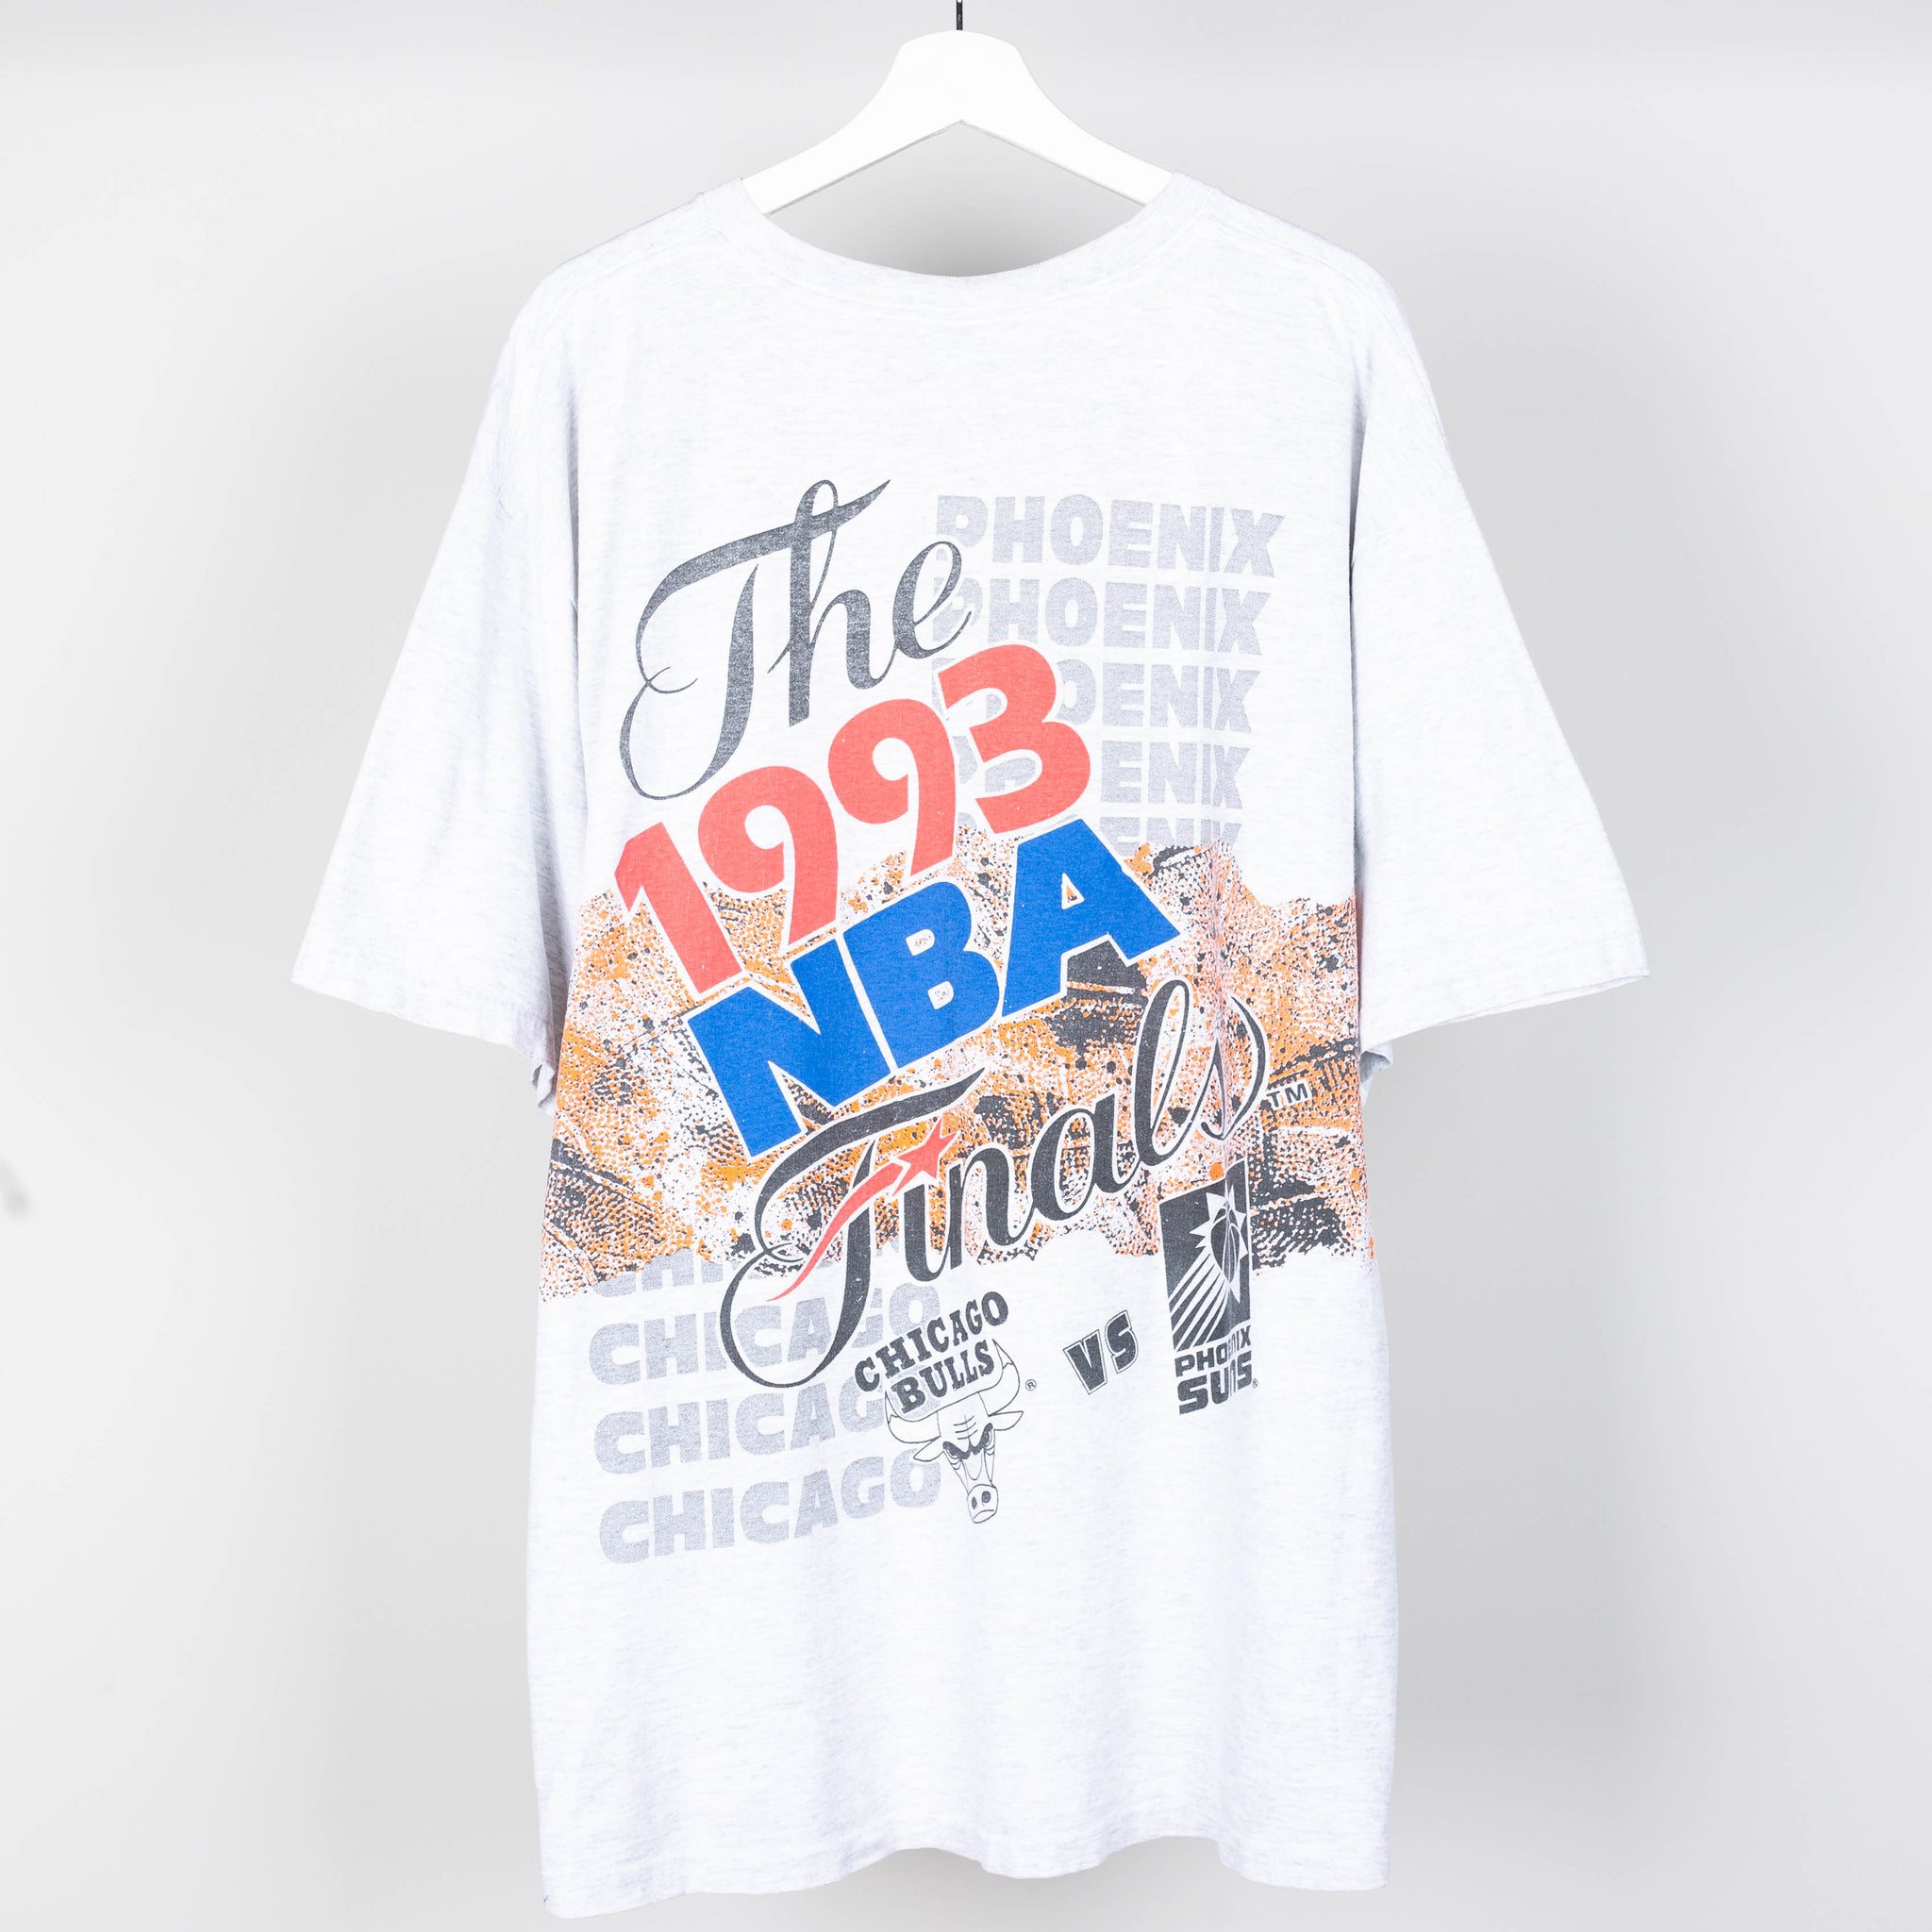 1993 NBA FINALS GRAPHIC TEE – Fly Vintage 87